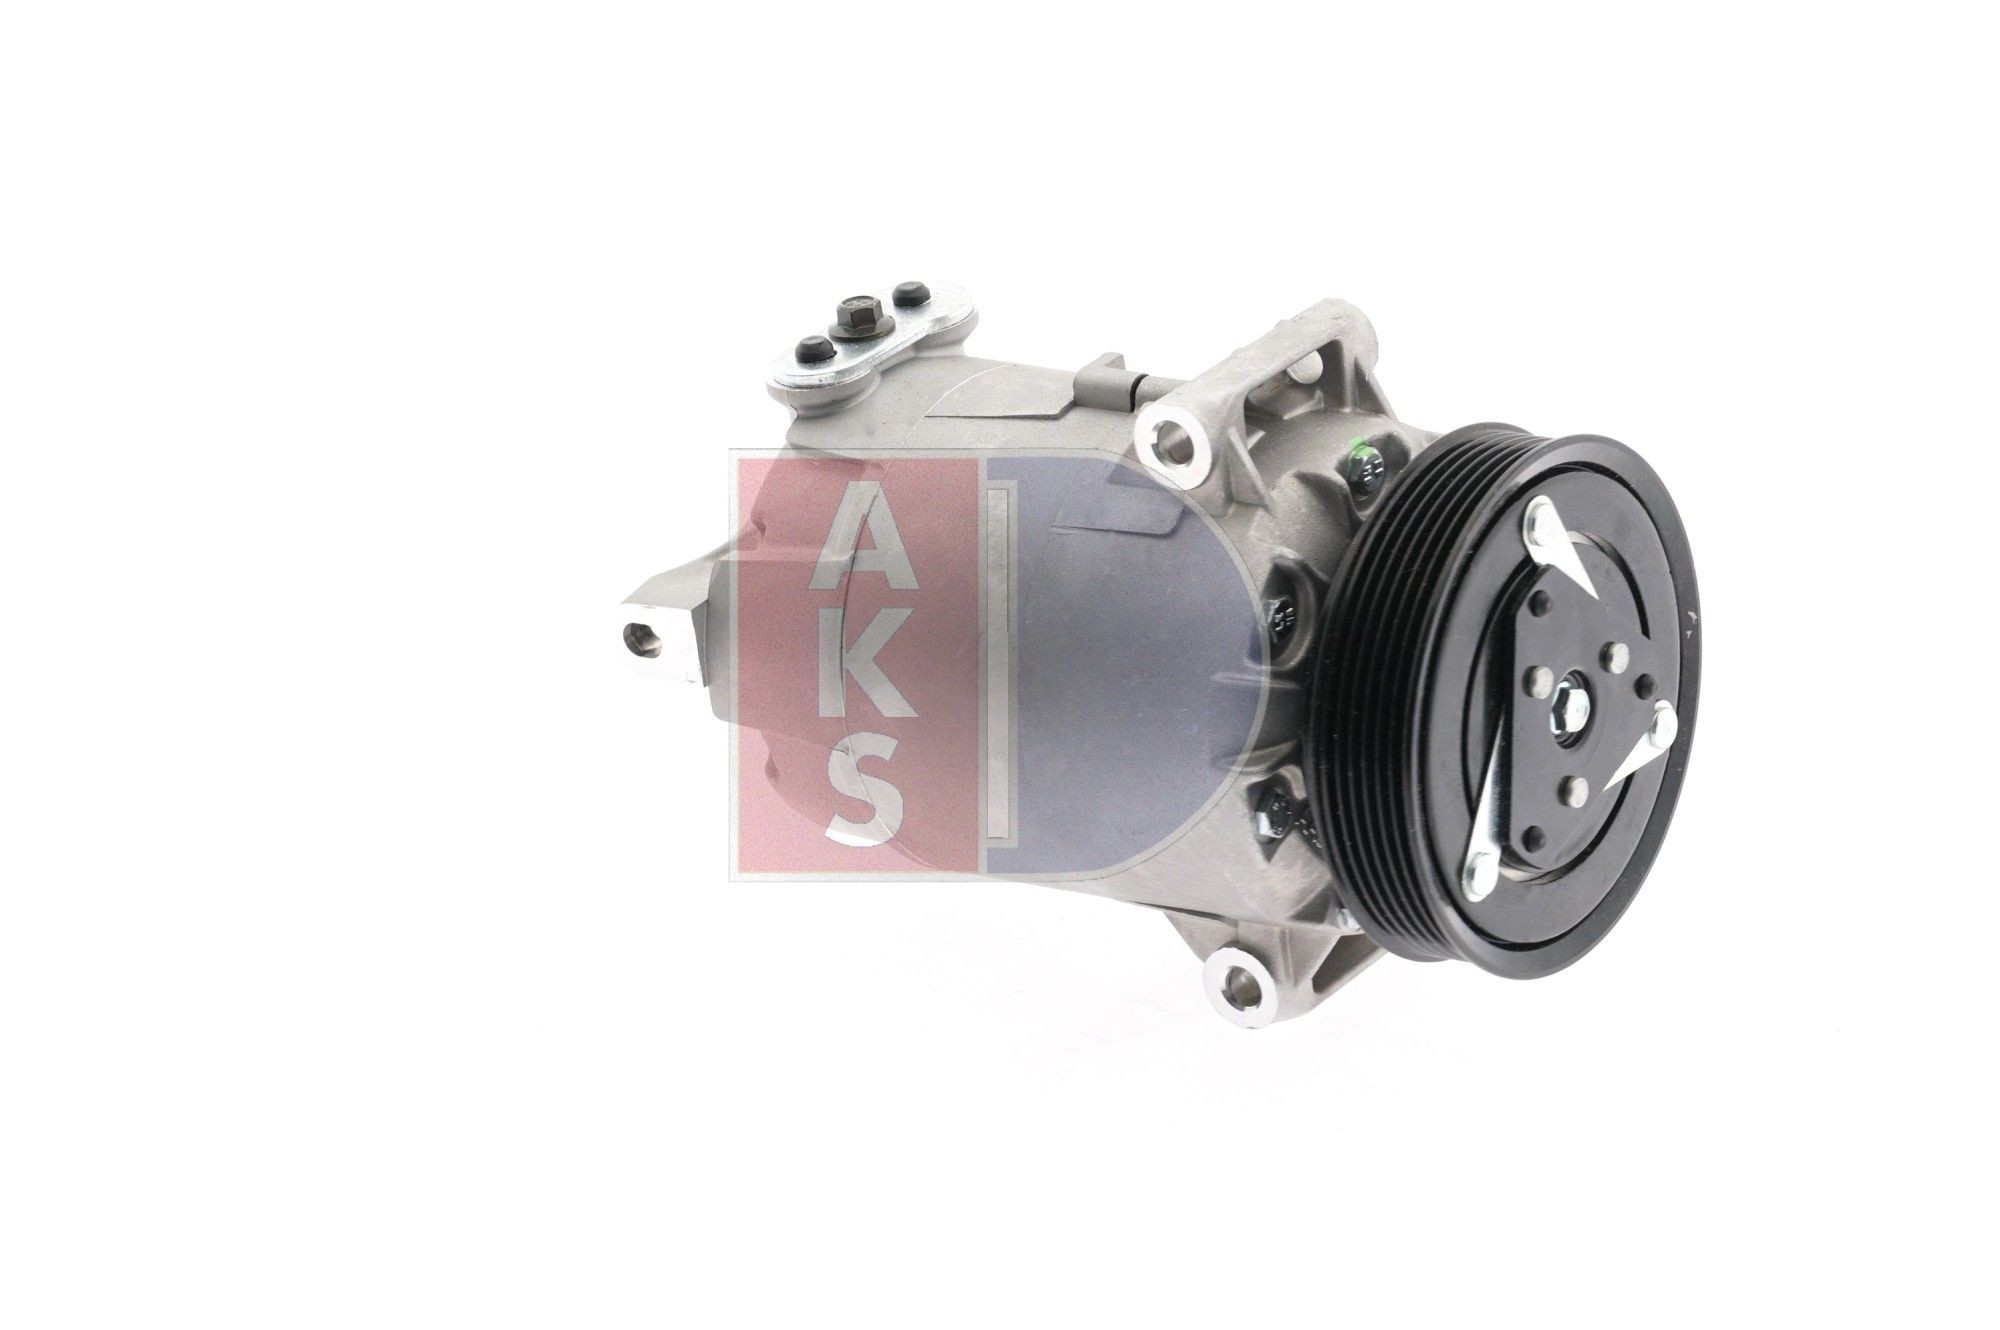 Air conditioning compressor 850058N from AKS DASIS